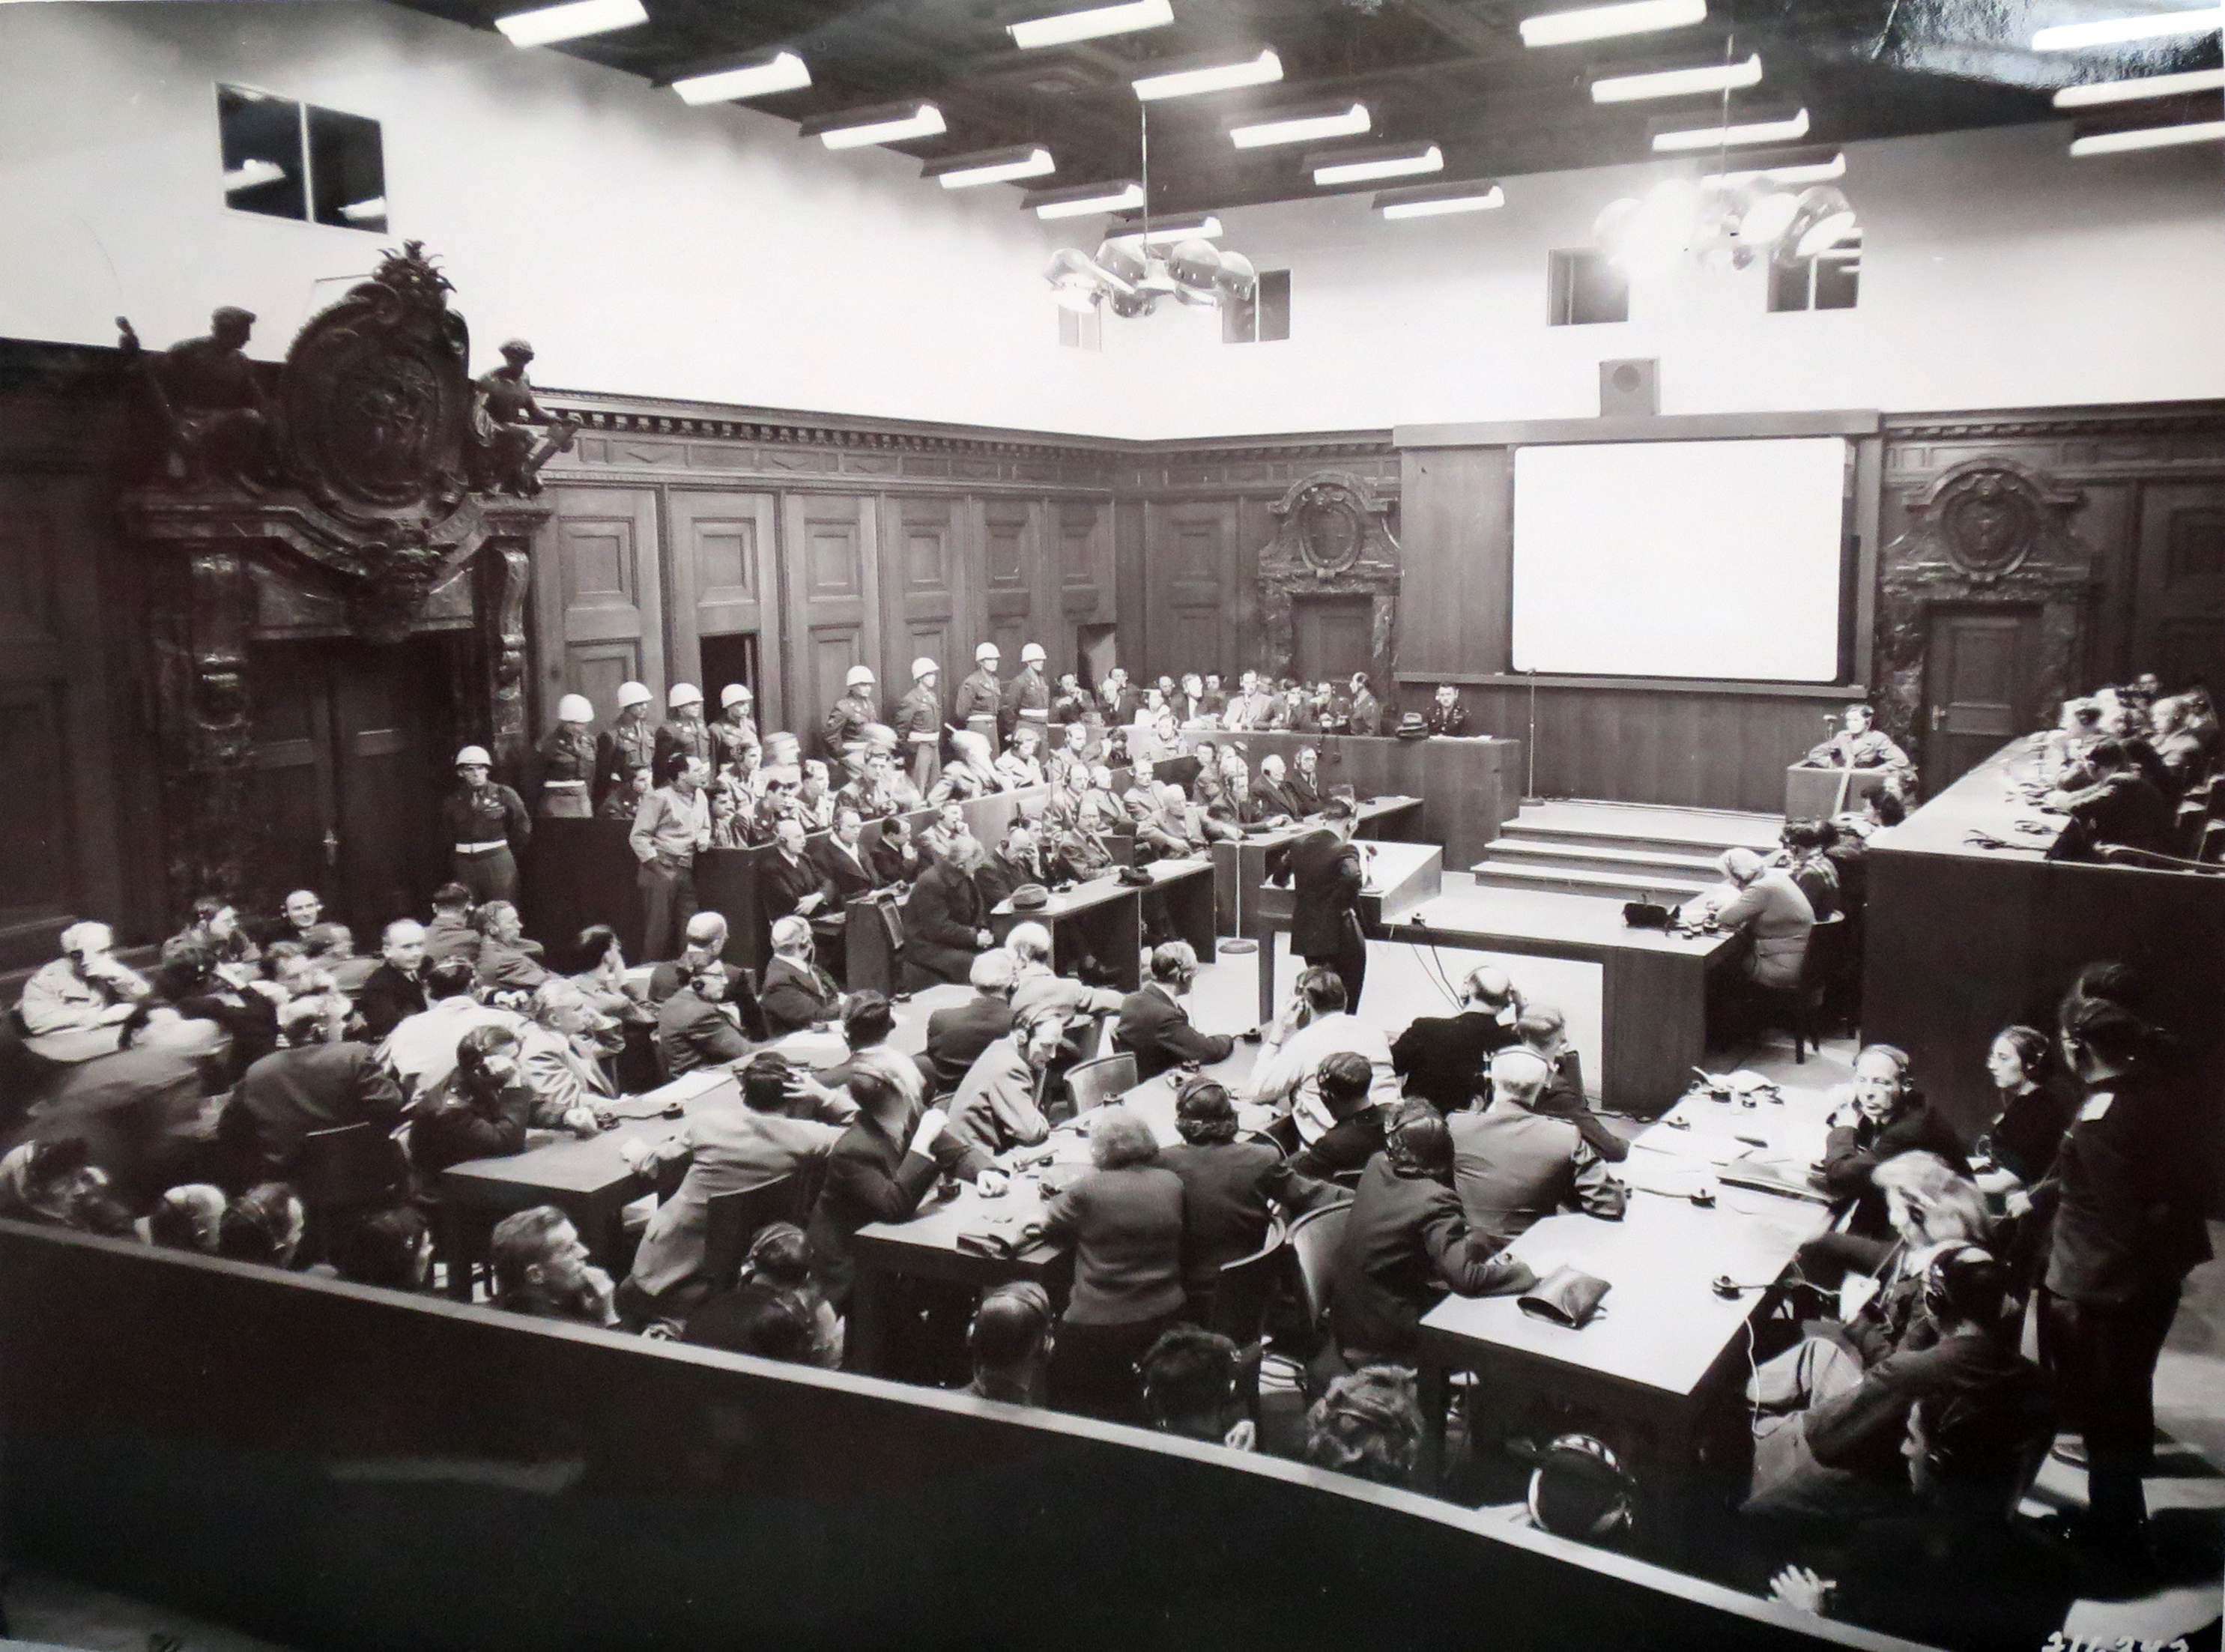 Building the Case: Design and Media at the International Military Tribunal, c. 1945